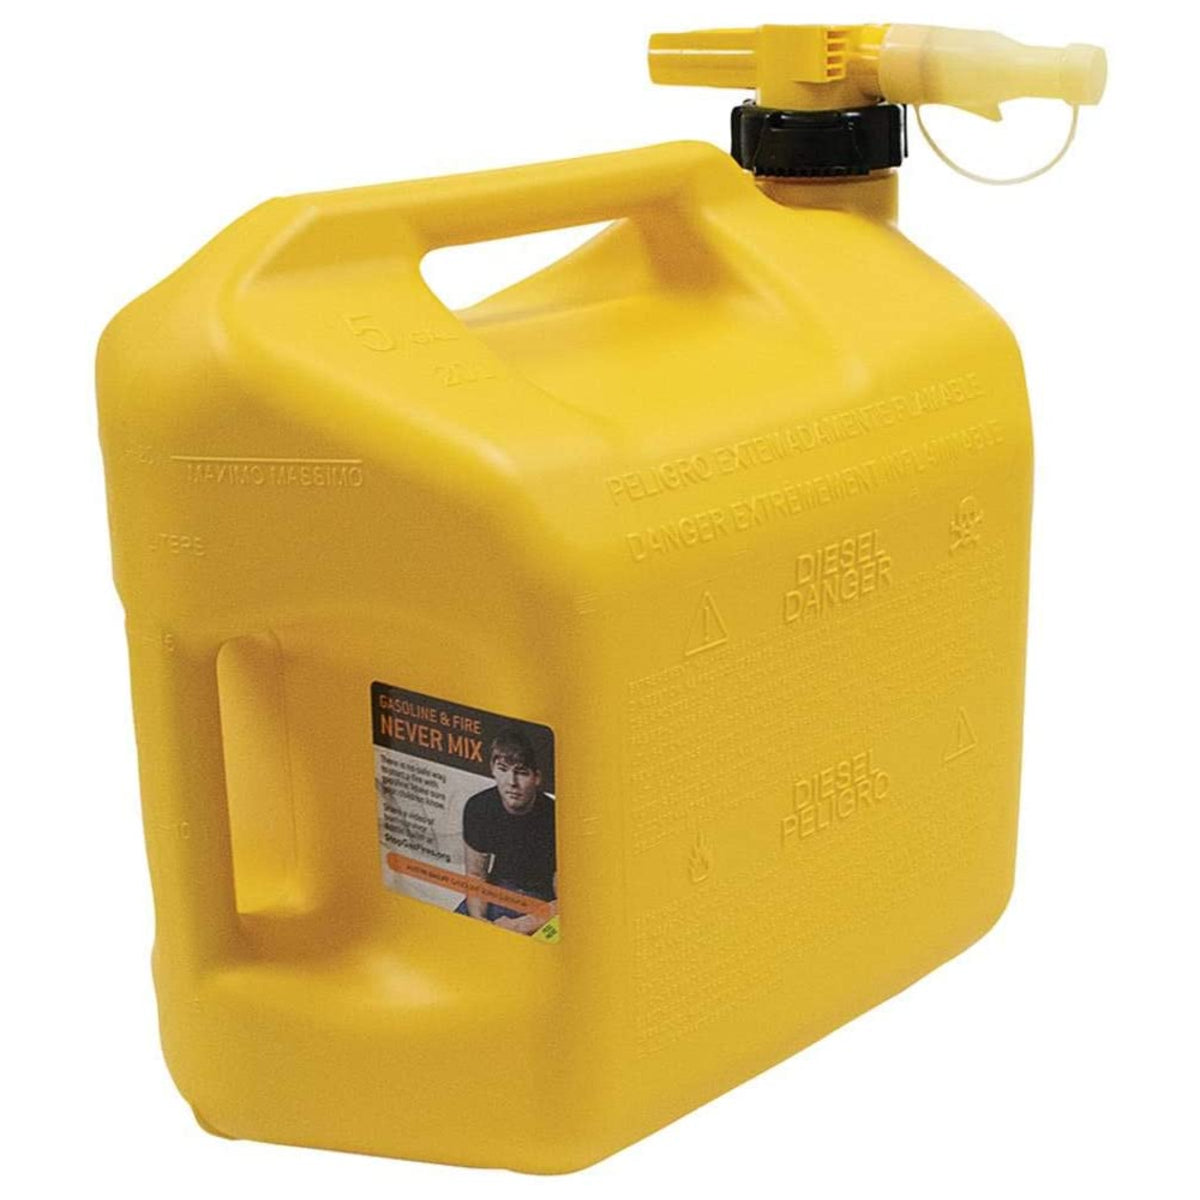 No-Spill 1457 Poly Diesel Fuel Can with Rear-Handle, 5-Gallon